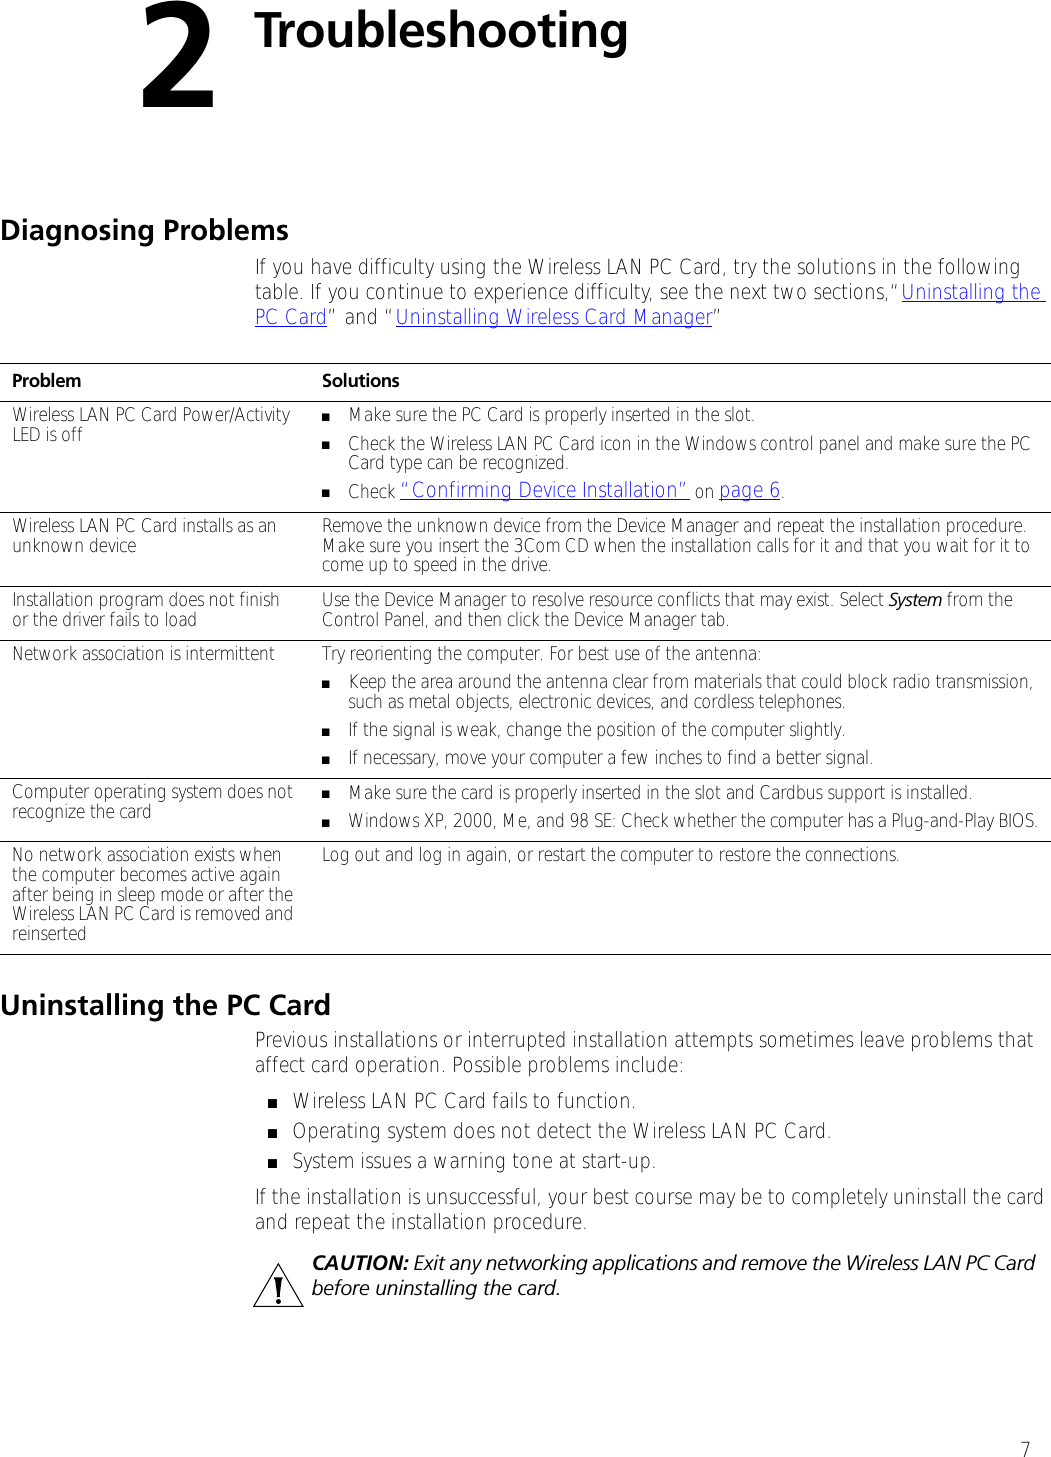 72TroubleshootingDiagnosing ProblemsIf you have difficulty using the Wireless LAN PC Card, try the solutions in the following table. If you continue to experience difficulty, see the next two sections,“Uninstalling the PC Card” and “Uninstalling Wireless Card Manager”Uninstalling the PC CardPrevious installations or interrupted installation attempts sometimes leave problems that affect card operation. Possible problems include:■Wireless LAN PC Card fails to function.■Operating system does not detect the Wireless LAN PC Card.■System issues a warning tone at start-up.If the installation is unsuccessful, your best course may be to completely uninstall the card and repeat the installation procedure.Problem SolutionsWireless LAN PC Card Power/Activity LED is off ■Make sure the PC Card is properly inserted in the slot.■Check the Wireless LAN PC Card icon in the Windows control panel and make sure the PC Card type can be recognized.■Check “Confirming Device Installation” on page 6.Wireless LAN PC Card installs as an unknown device Remove the unknown device from the Device Manager and repeat the installation procedure. Make sure you insert the 3Com CD when the installation calls for it and that you wait for it to come up to speed in the drive. Installation program does not finish or the driver fails to load Use the Device Manager to resolve resource conflicts that may exist. Select System from the Control Panel, and then click the Device Manager tab.Network association is intermittent  Try reorienting the computer. For best use of the antenna:■Keep the area around the antenna clear from materials that could block radio transmission, such as metal objects, electronic devices, and cordless telephones.■If the signal is weak, change the position of the computer slightly.■If necessary, move your computer a few inches to find a better signal. Computer operating system does not recognize the card ■Make sure the card is properly inserted in the slot and Cardbus support is installed.■Windows XP, 2000, Me, and 98 SE: Check whether the computer has a Plug-and-Play BIOS.No network association exists when the computer becomes active again after being in sleep mode or after the Wireless LAN PC Card is removed and reinserted Log out and log in again, or restart the computer to restore the connections.CAUTION: Exit any networking applications and remove the Wireless LAN PC Card before uninstalling the card.